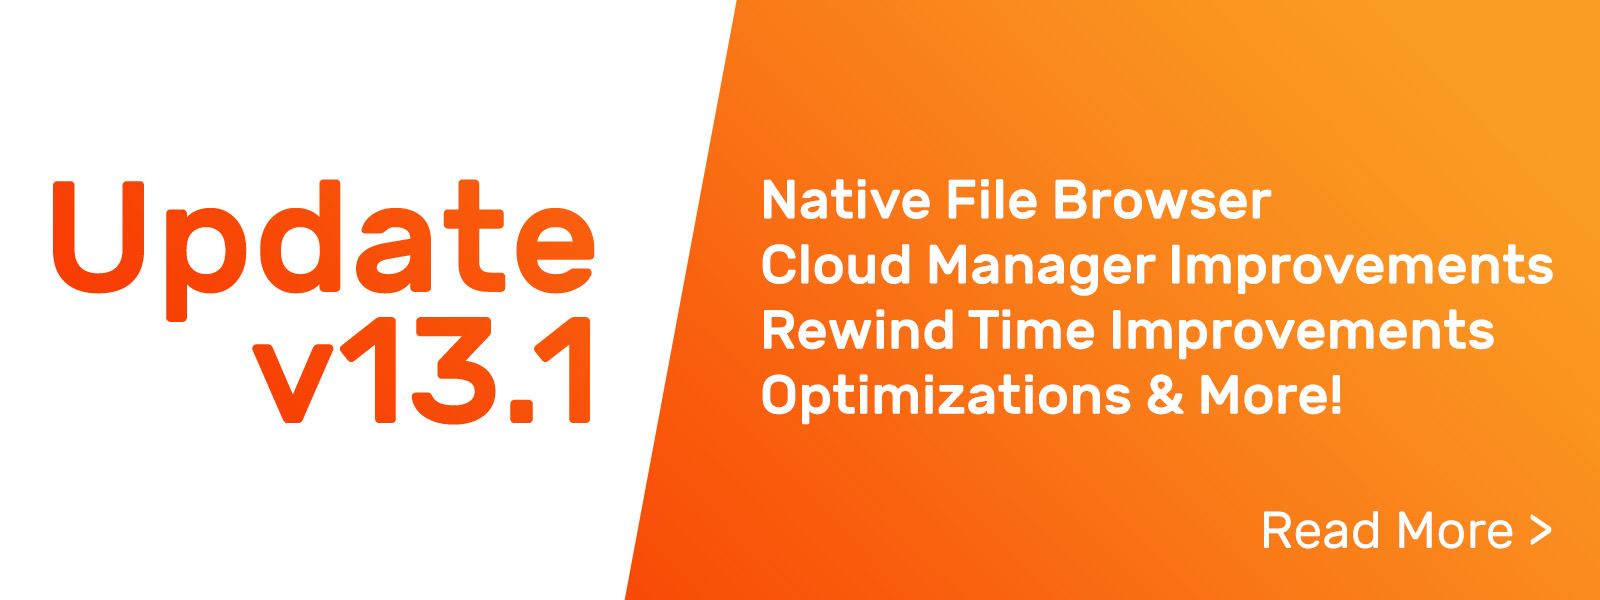 v13.1 Native File Browser, Cloud Manager & Rewind Time Improvements, Optimizations, and much more!